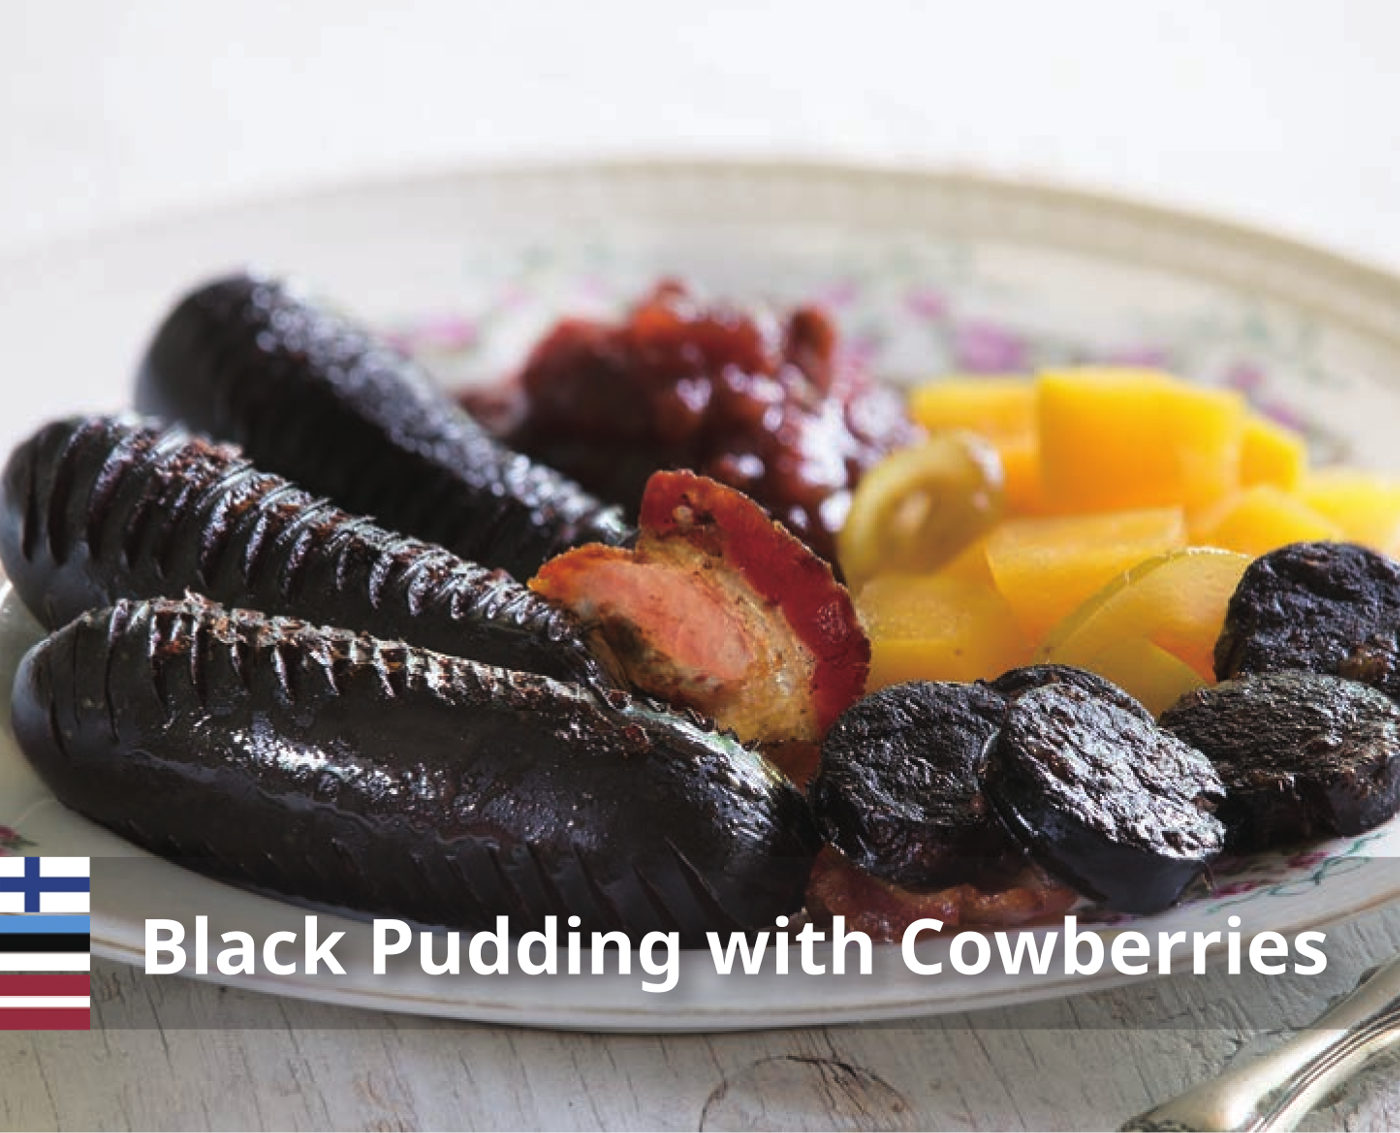 Black Pudding with Cowberries